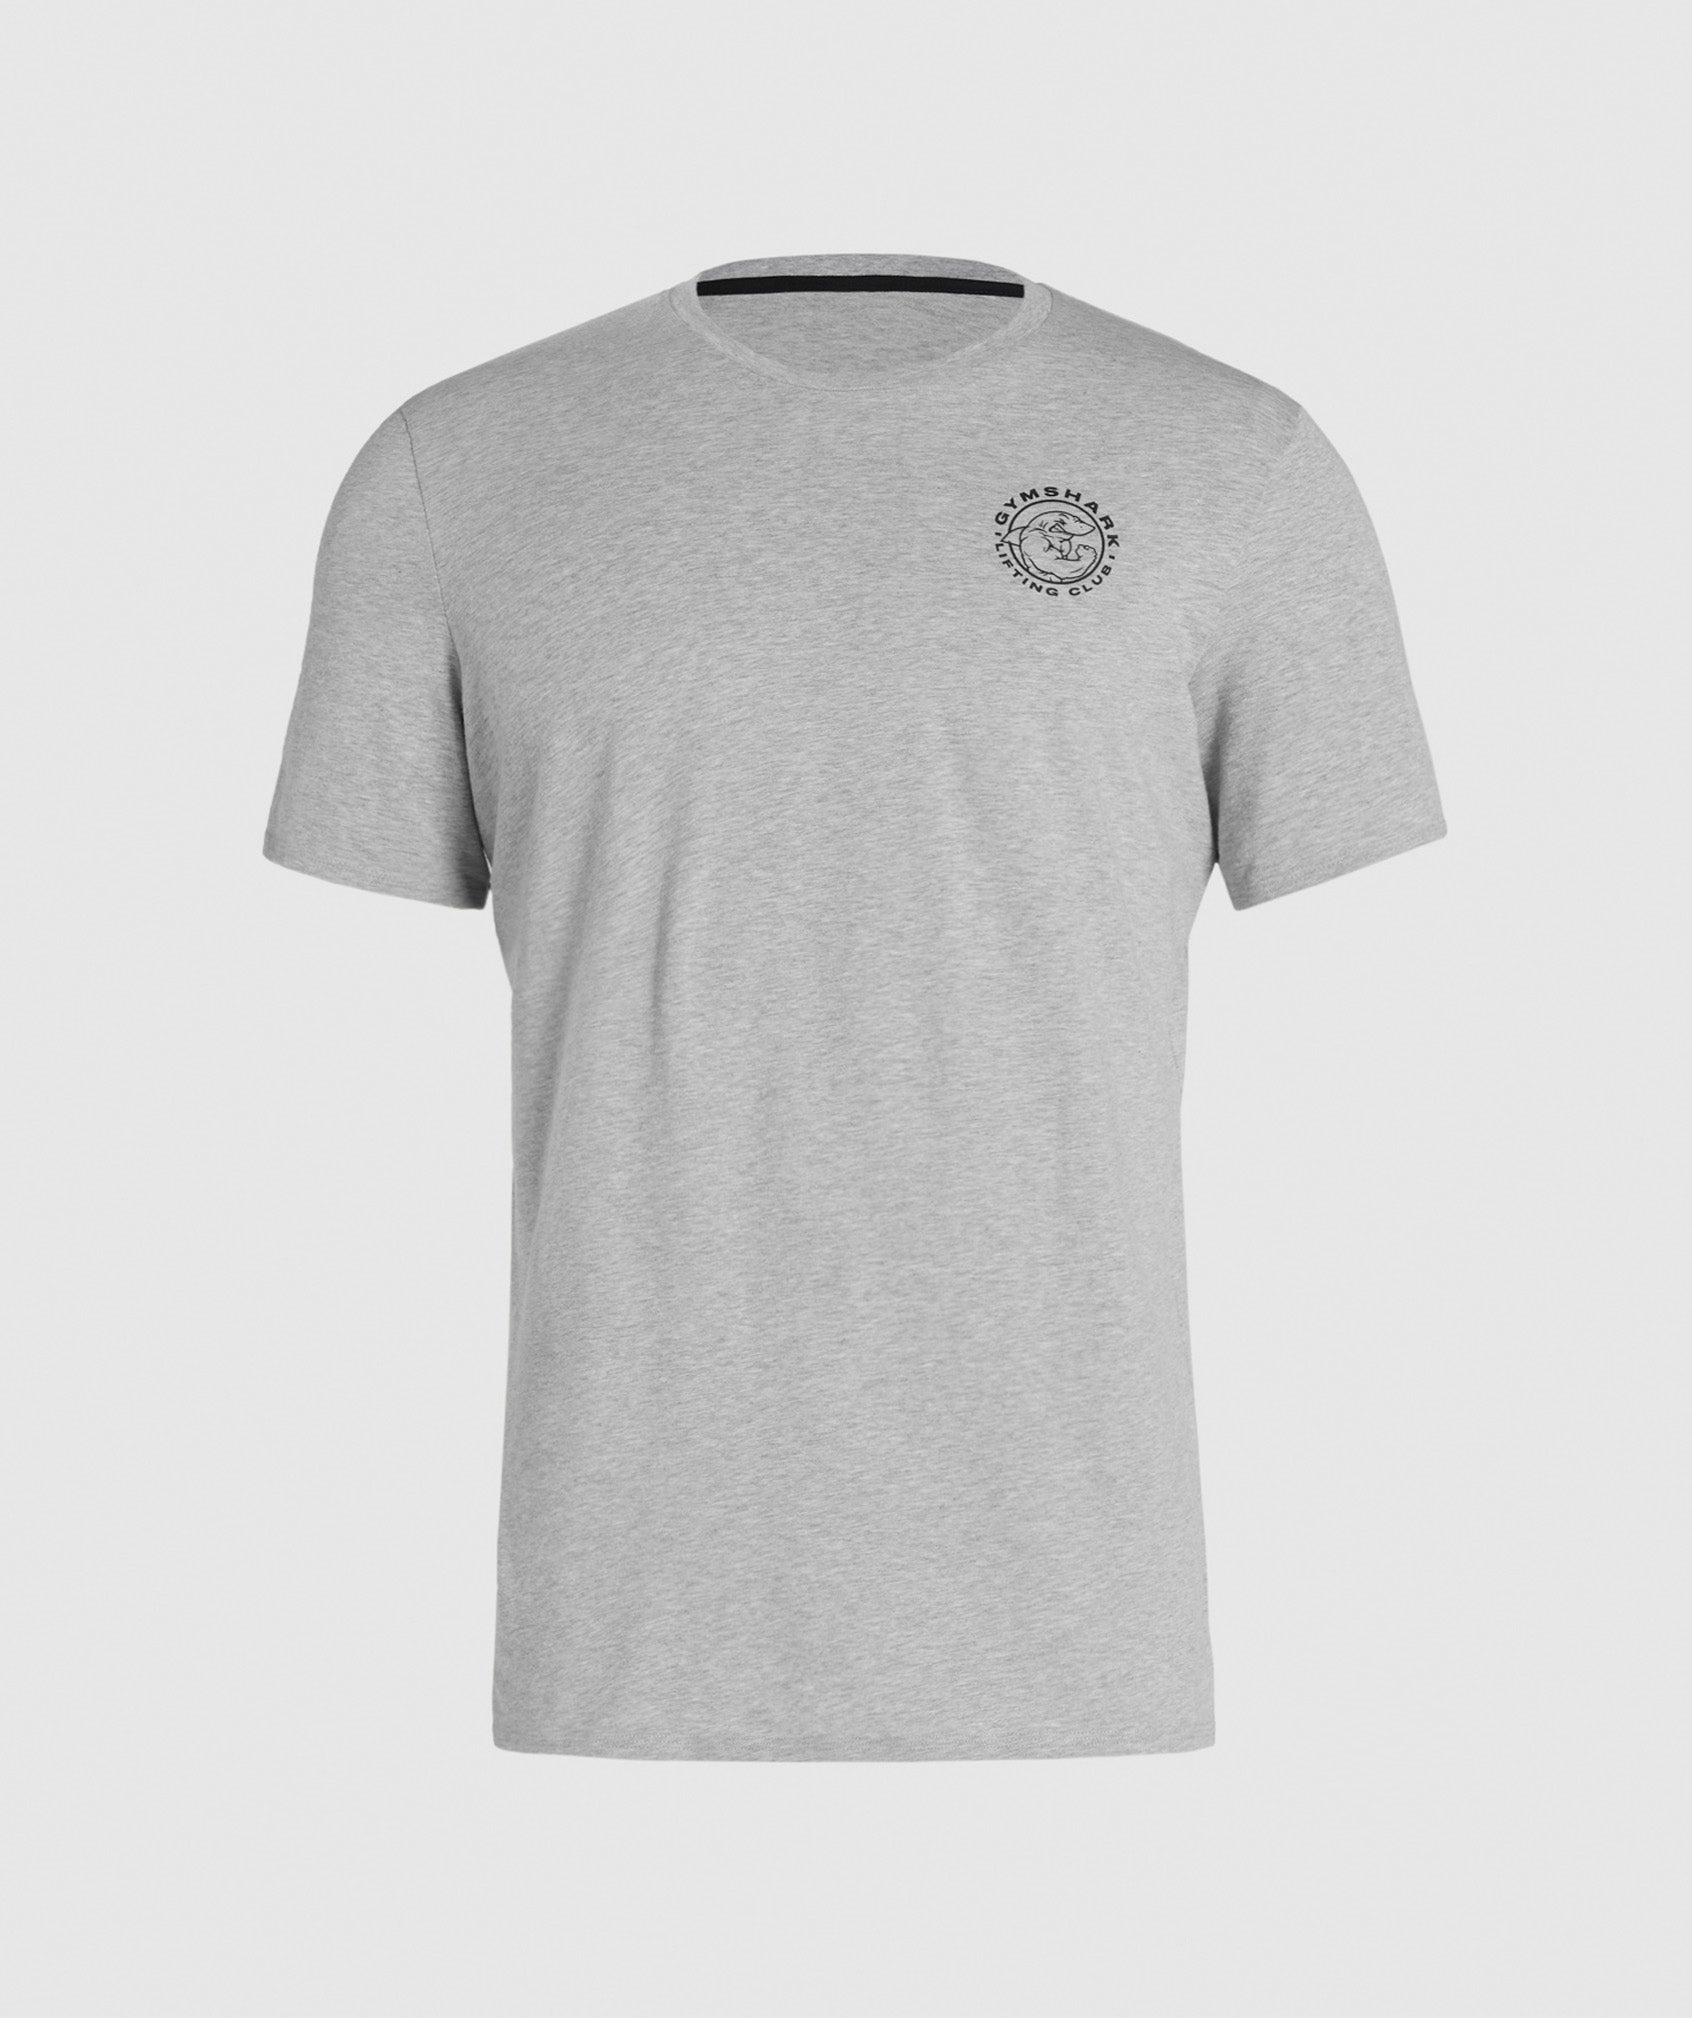 Legacy T-Shirt in Light Grey Marl - view 3